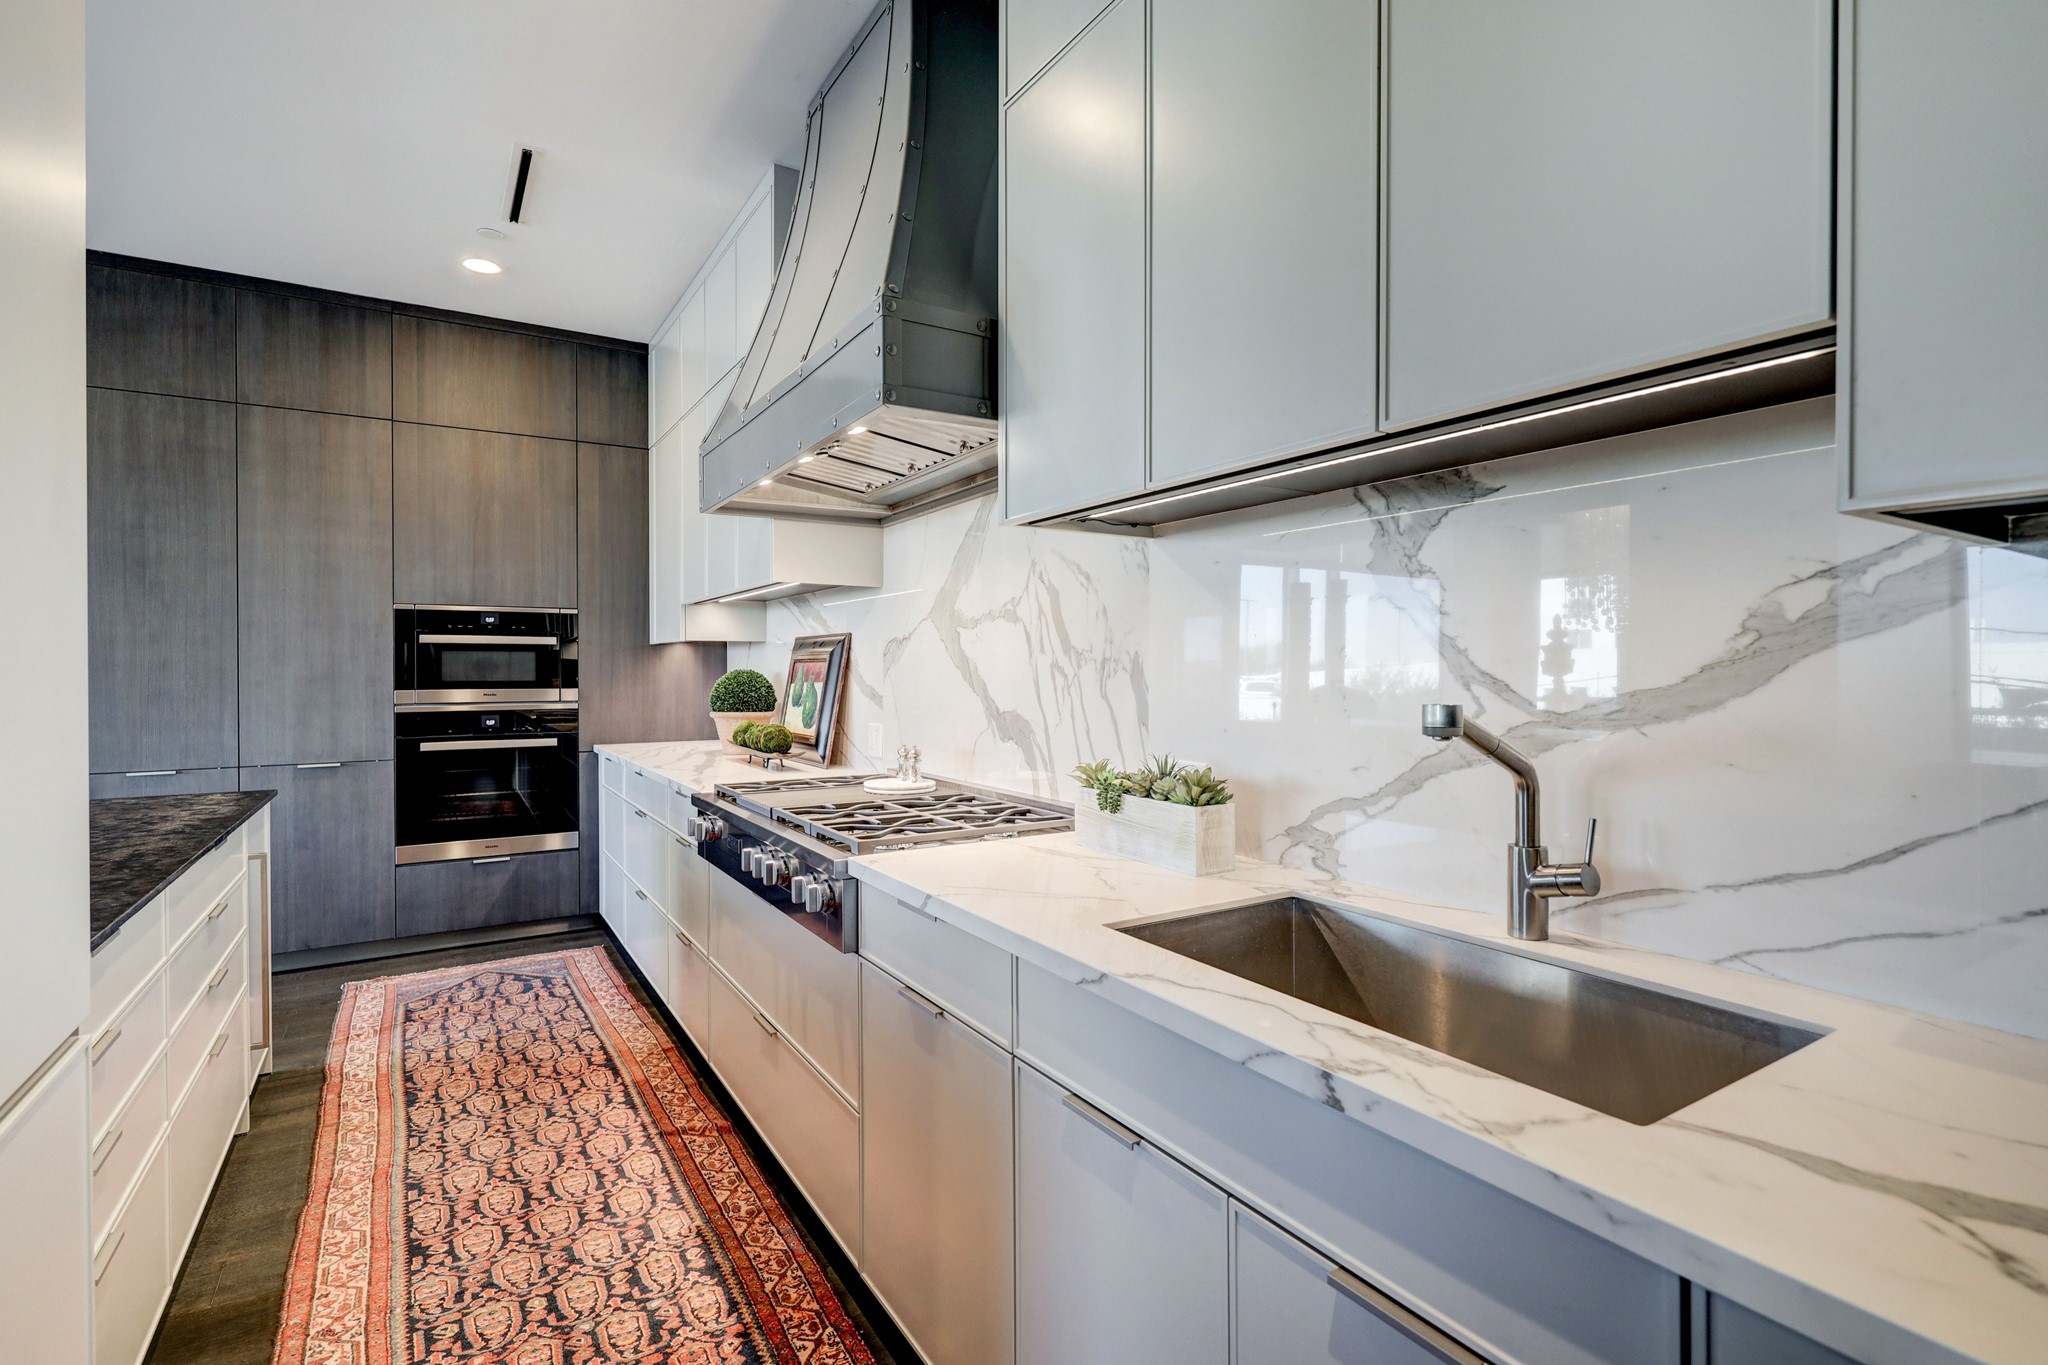 Quartzite counters, oversized sink and cook top with 6 gas burners (highly unusual in a high rise) and griddle, microwave and convection ovens. At the far end of the island is an ice maker. Wall cabinets extend to the ceiling to maximize storage.